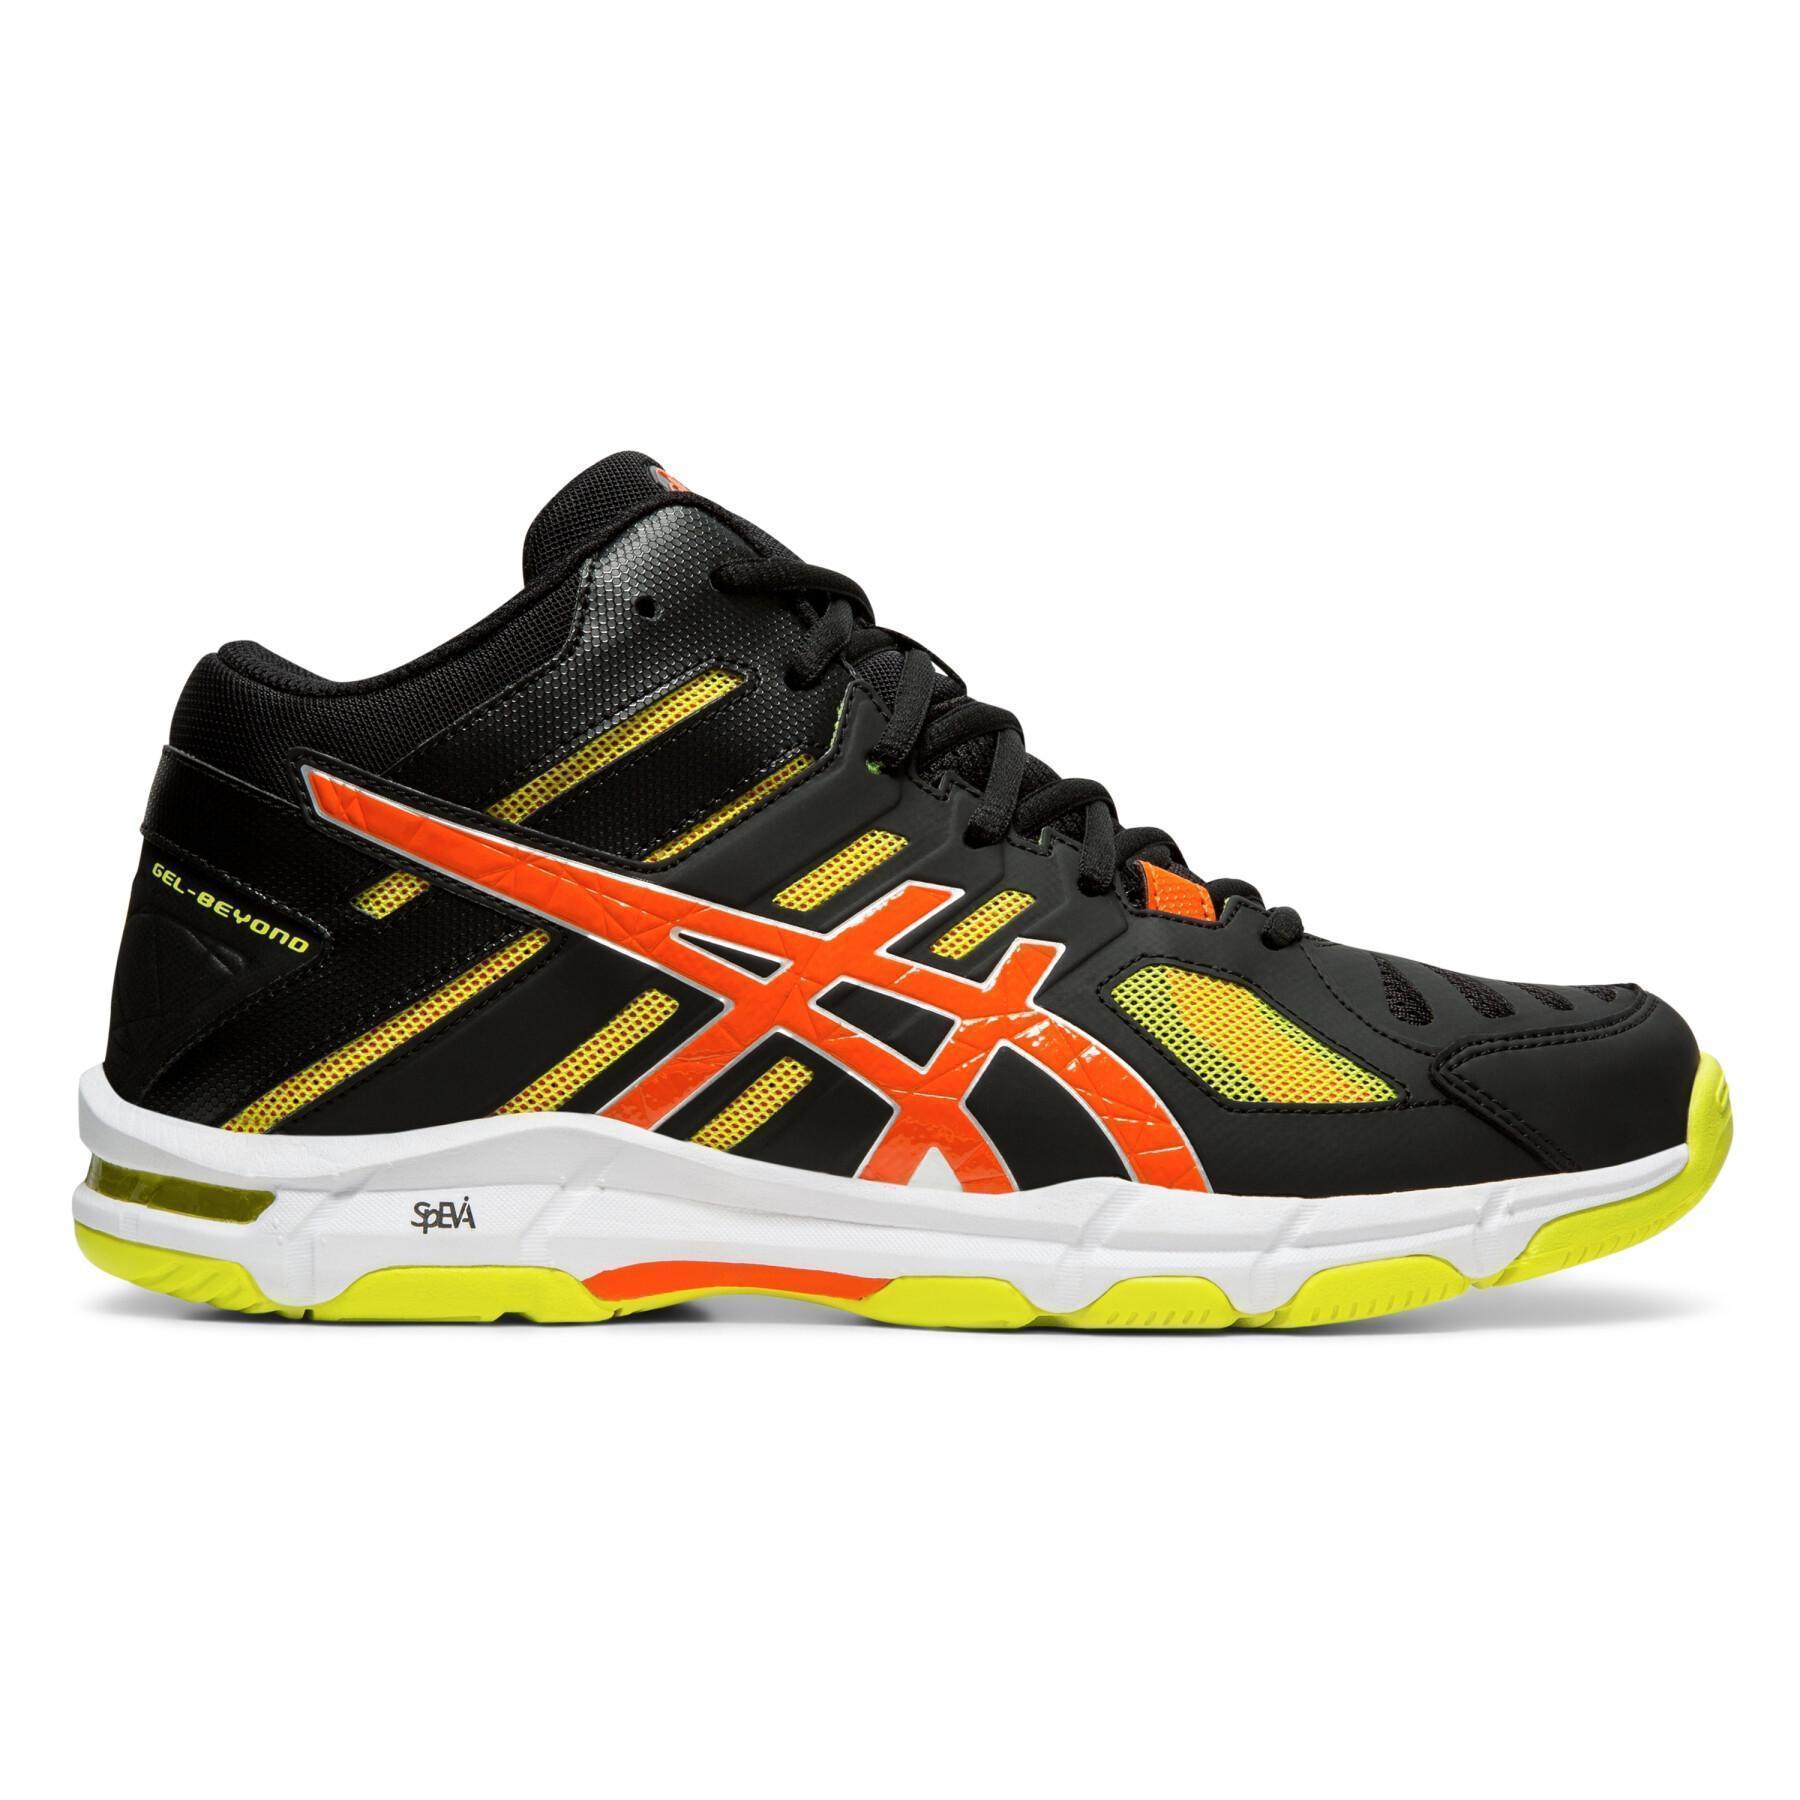 Chaussures montantes Asics Gel-beyond 5